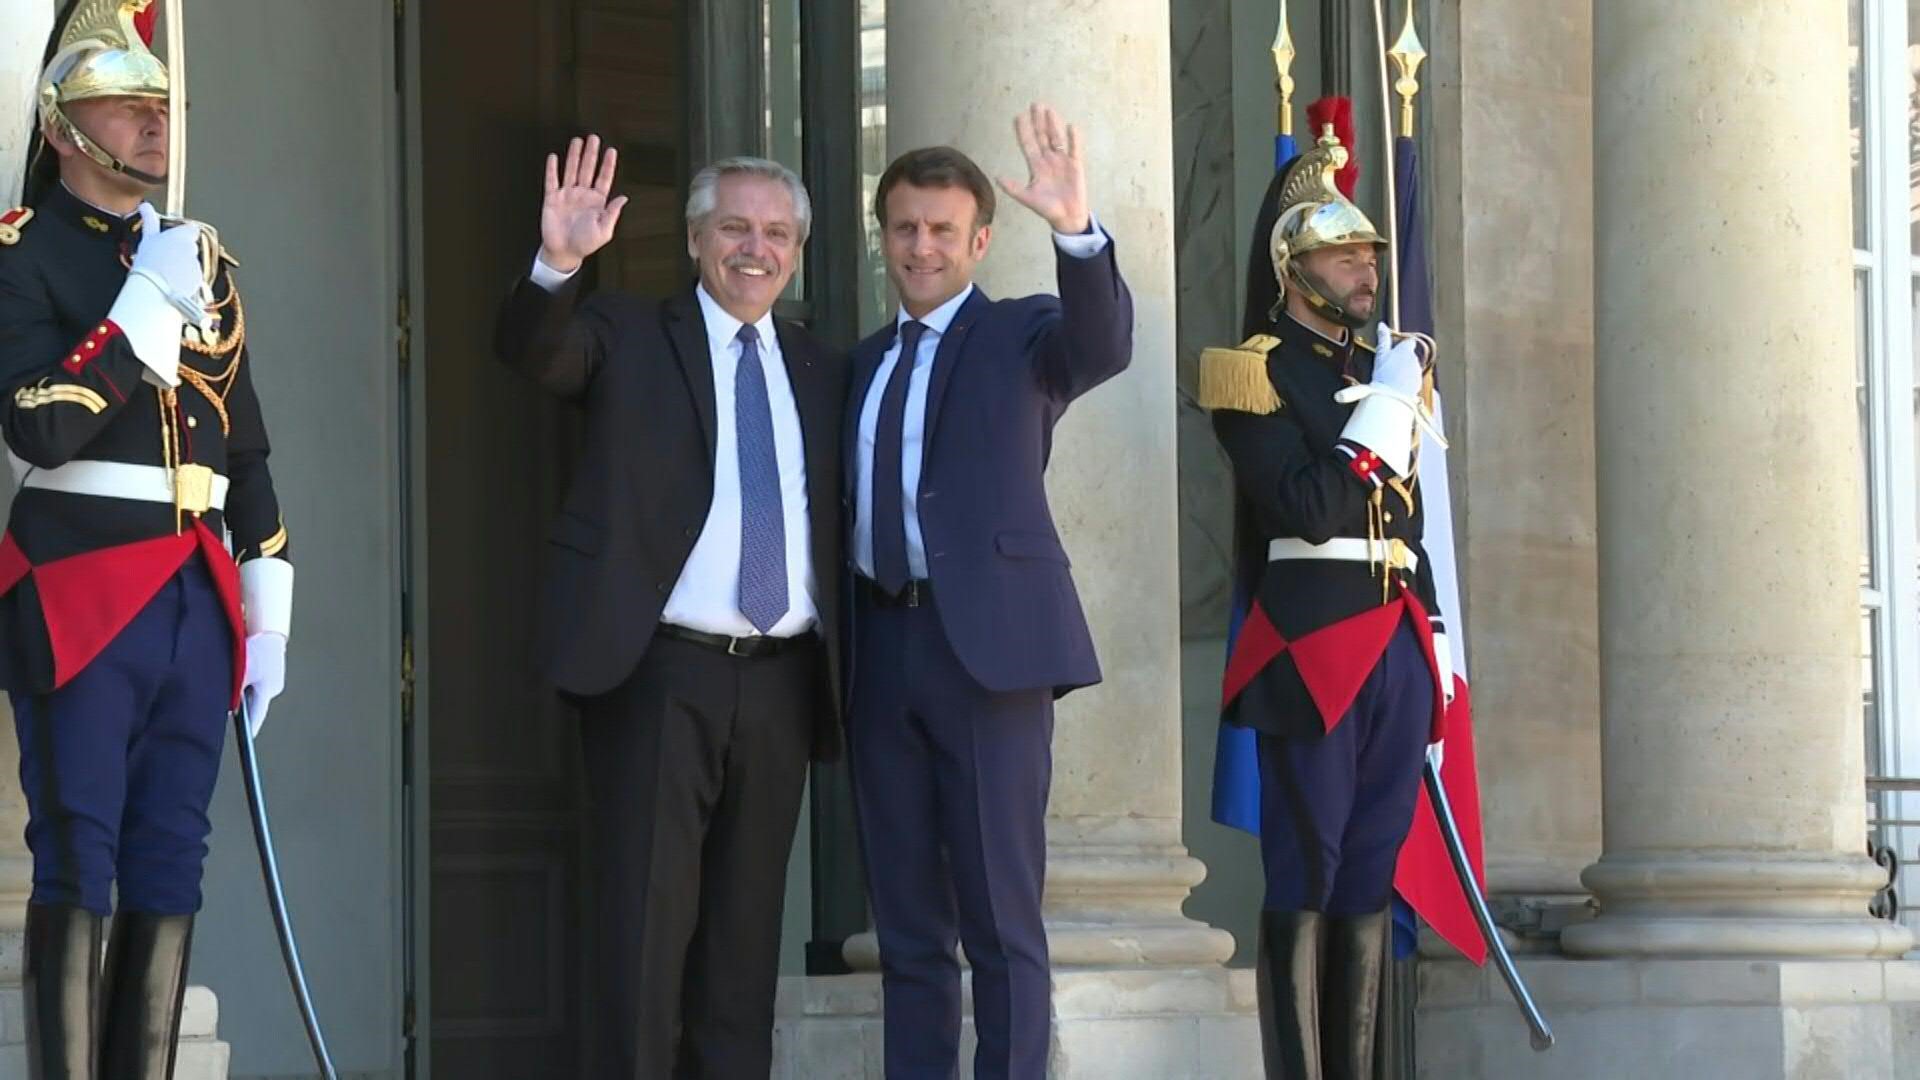 Alberto Fernández and Emmanuel Macron greet each other at the Eliseo Palace entrance, before their meeting to analyze the global situation due to the war in Ukraine